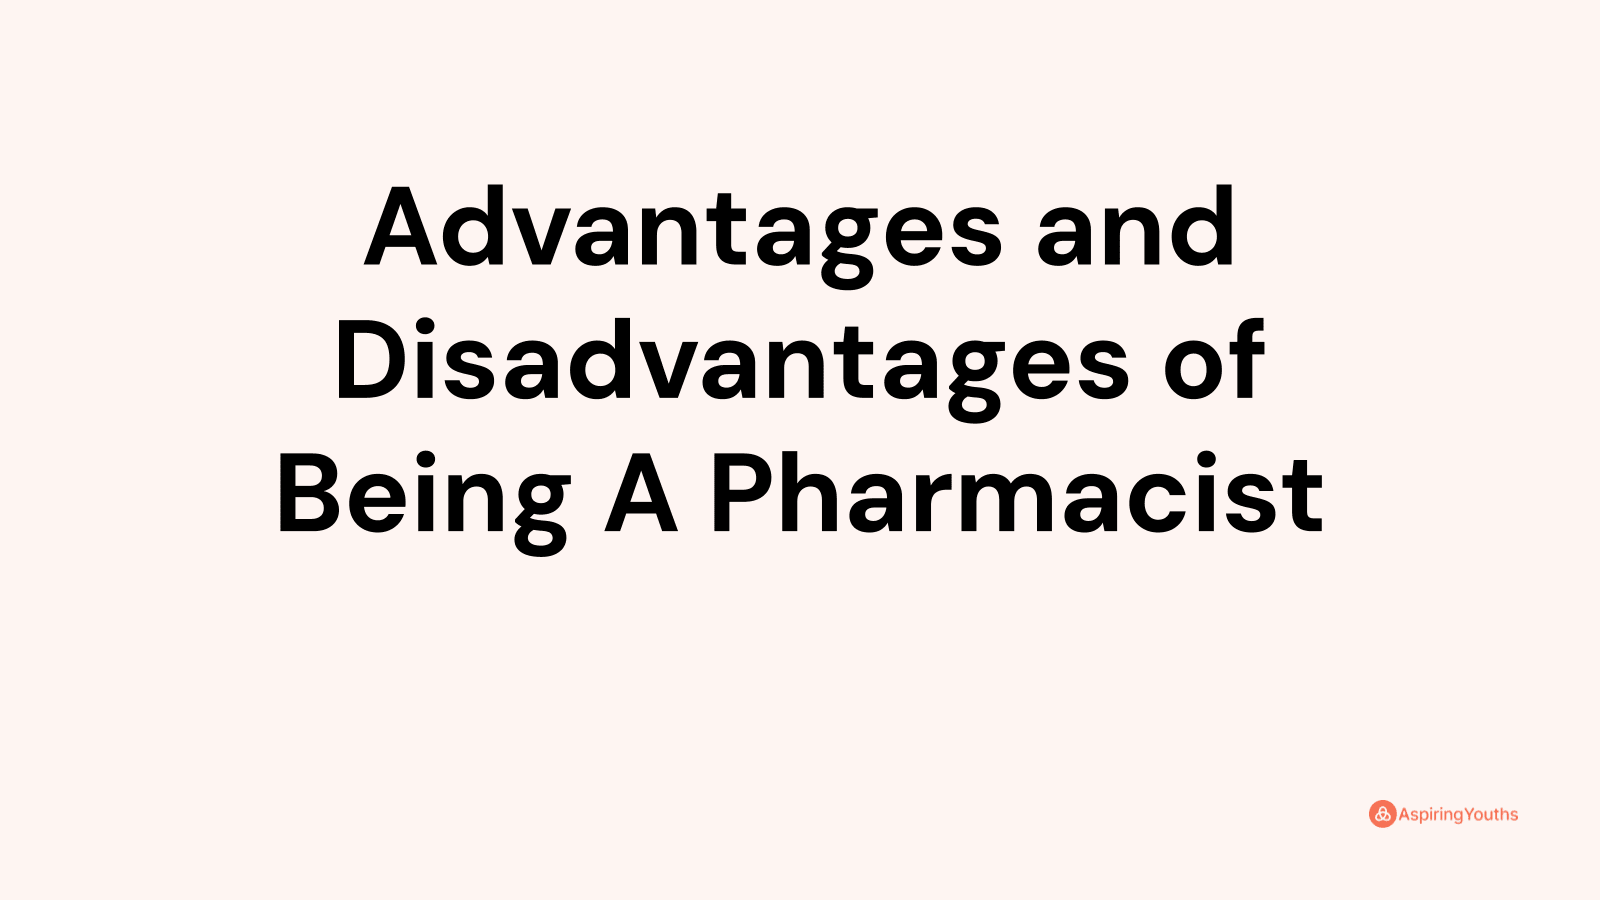 Advantages and disadvantages of Being A Pharmacist